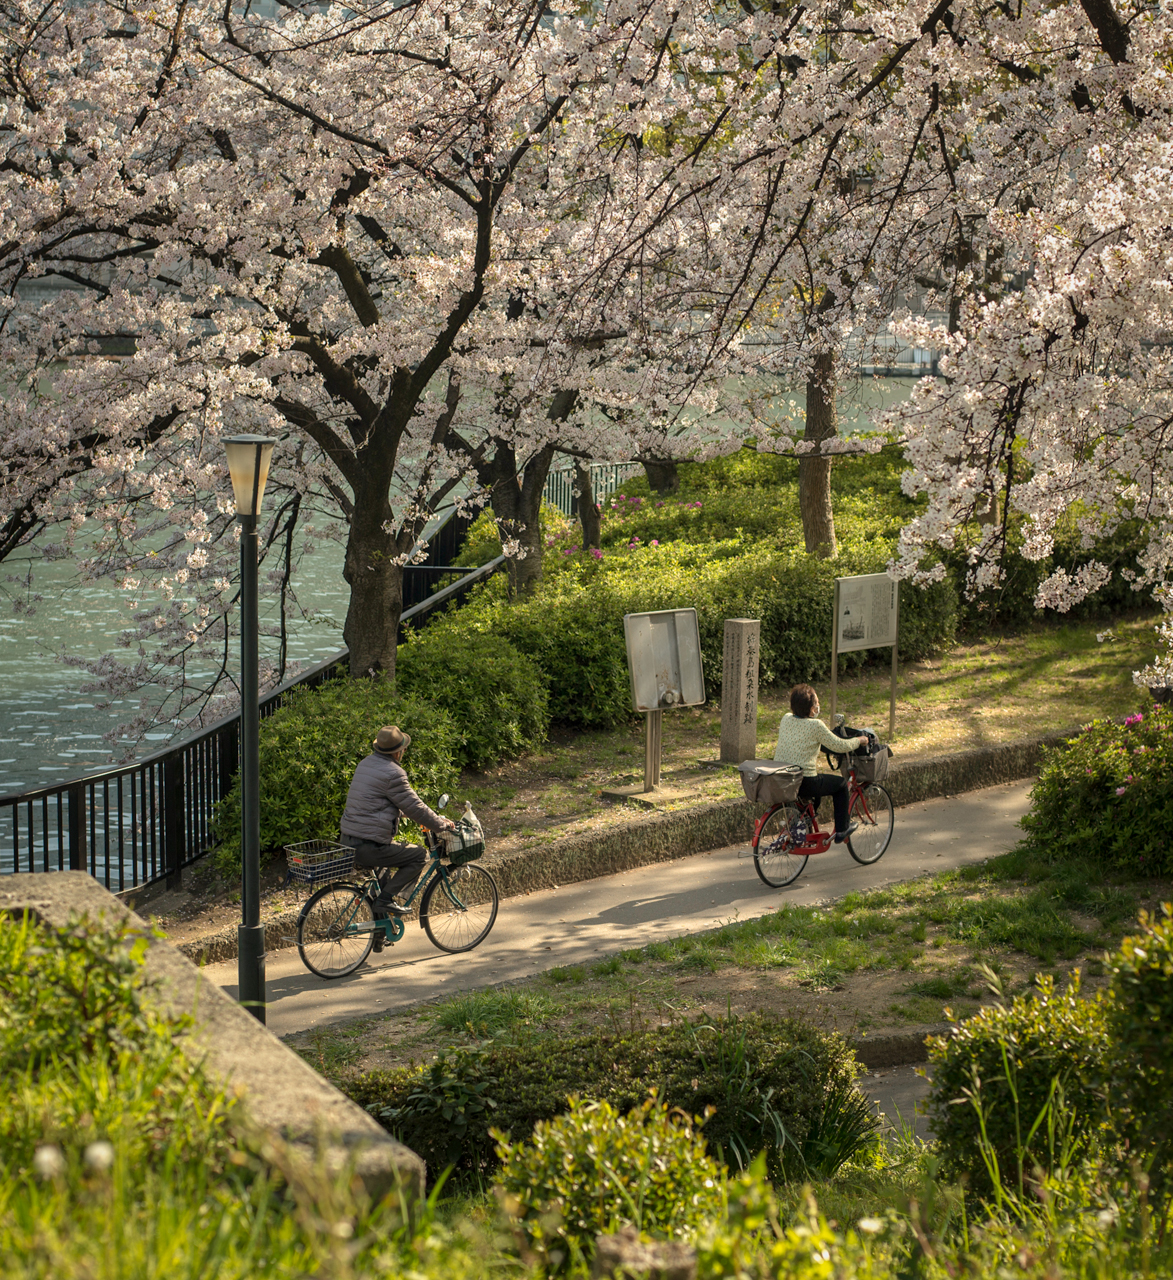 Two people on bikes riding through a park with cherry blossoms and water